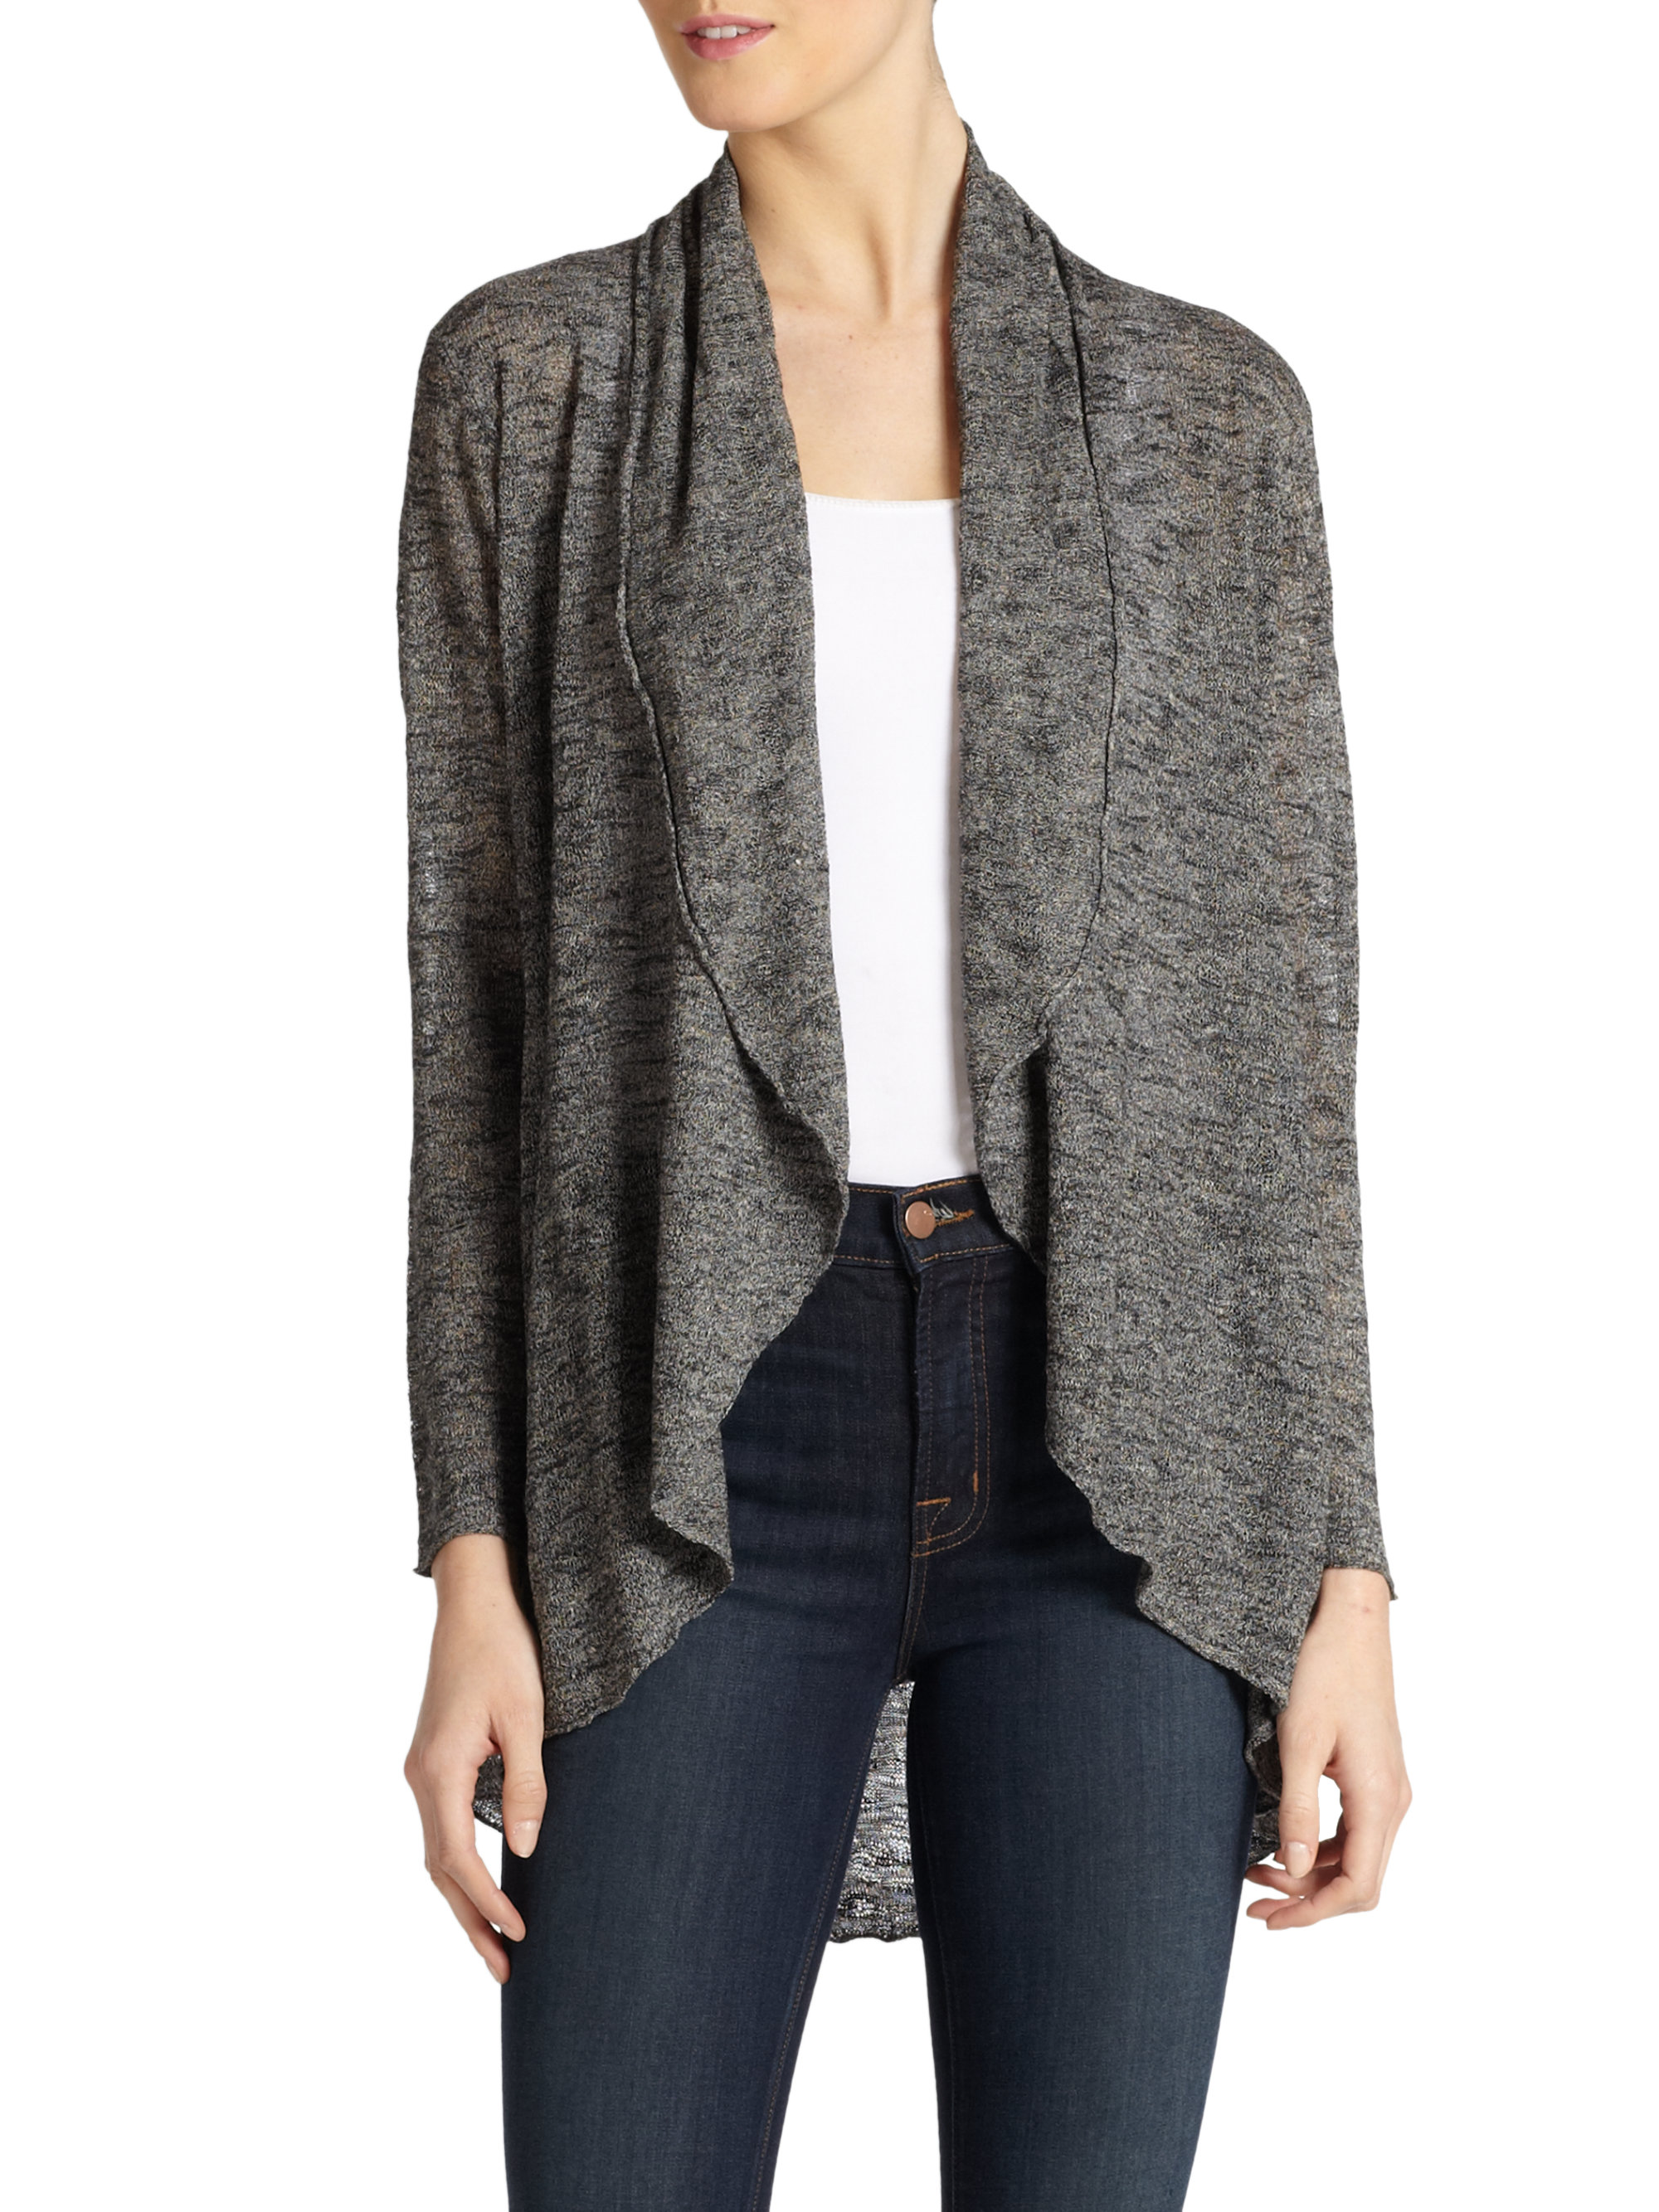 Eileen Fisher Variegated Knit Drapefront Long Cardigan in Graphite ...